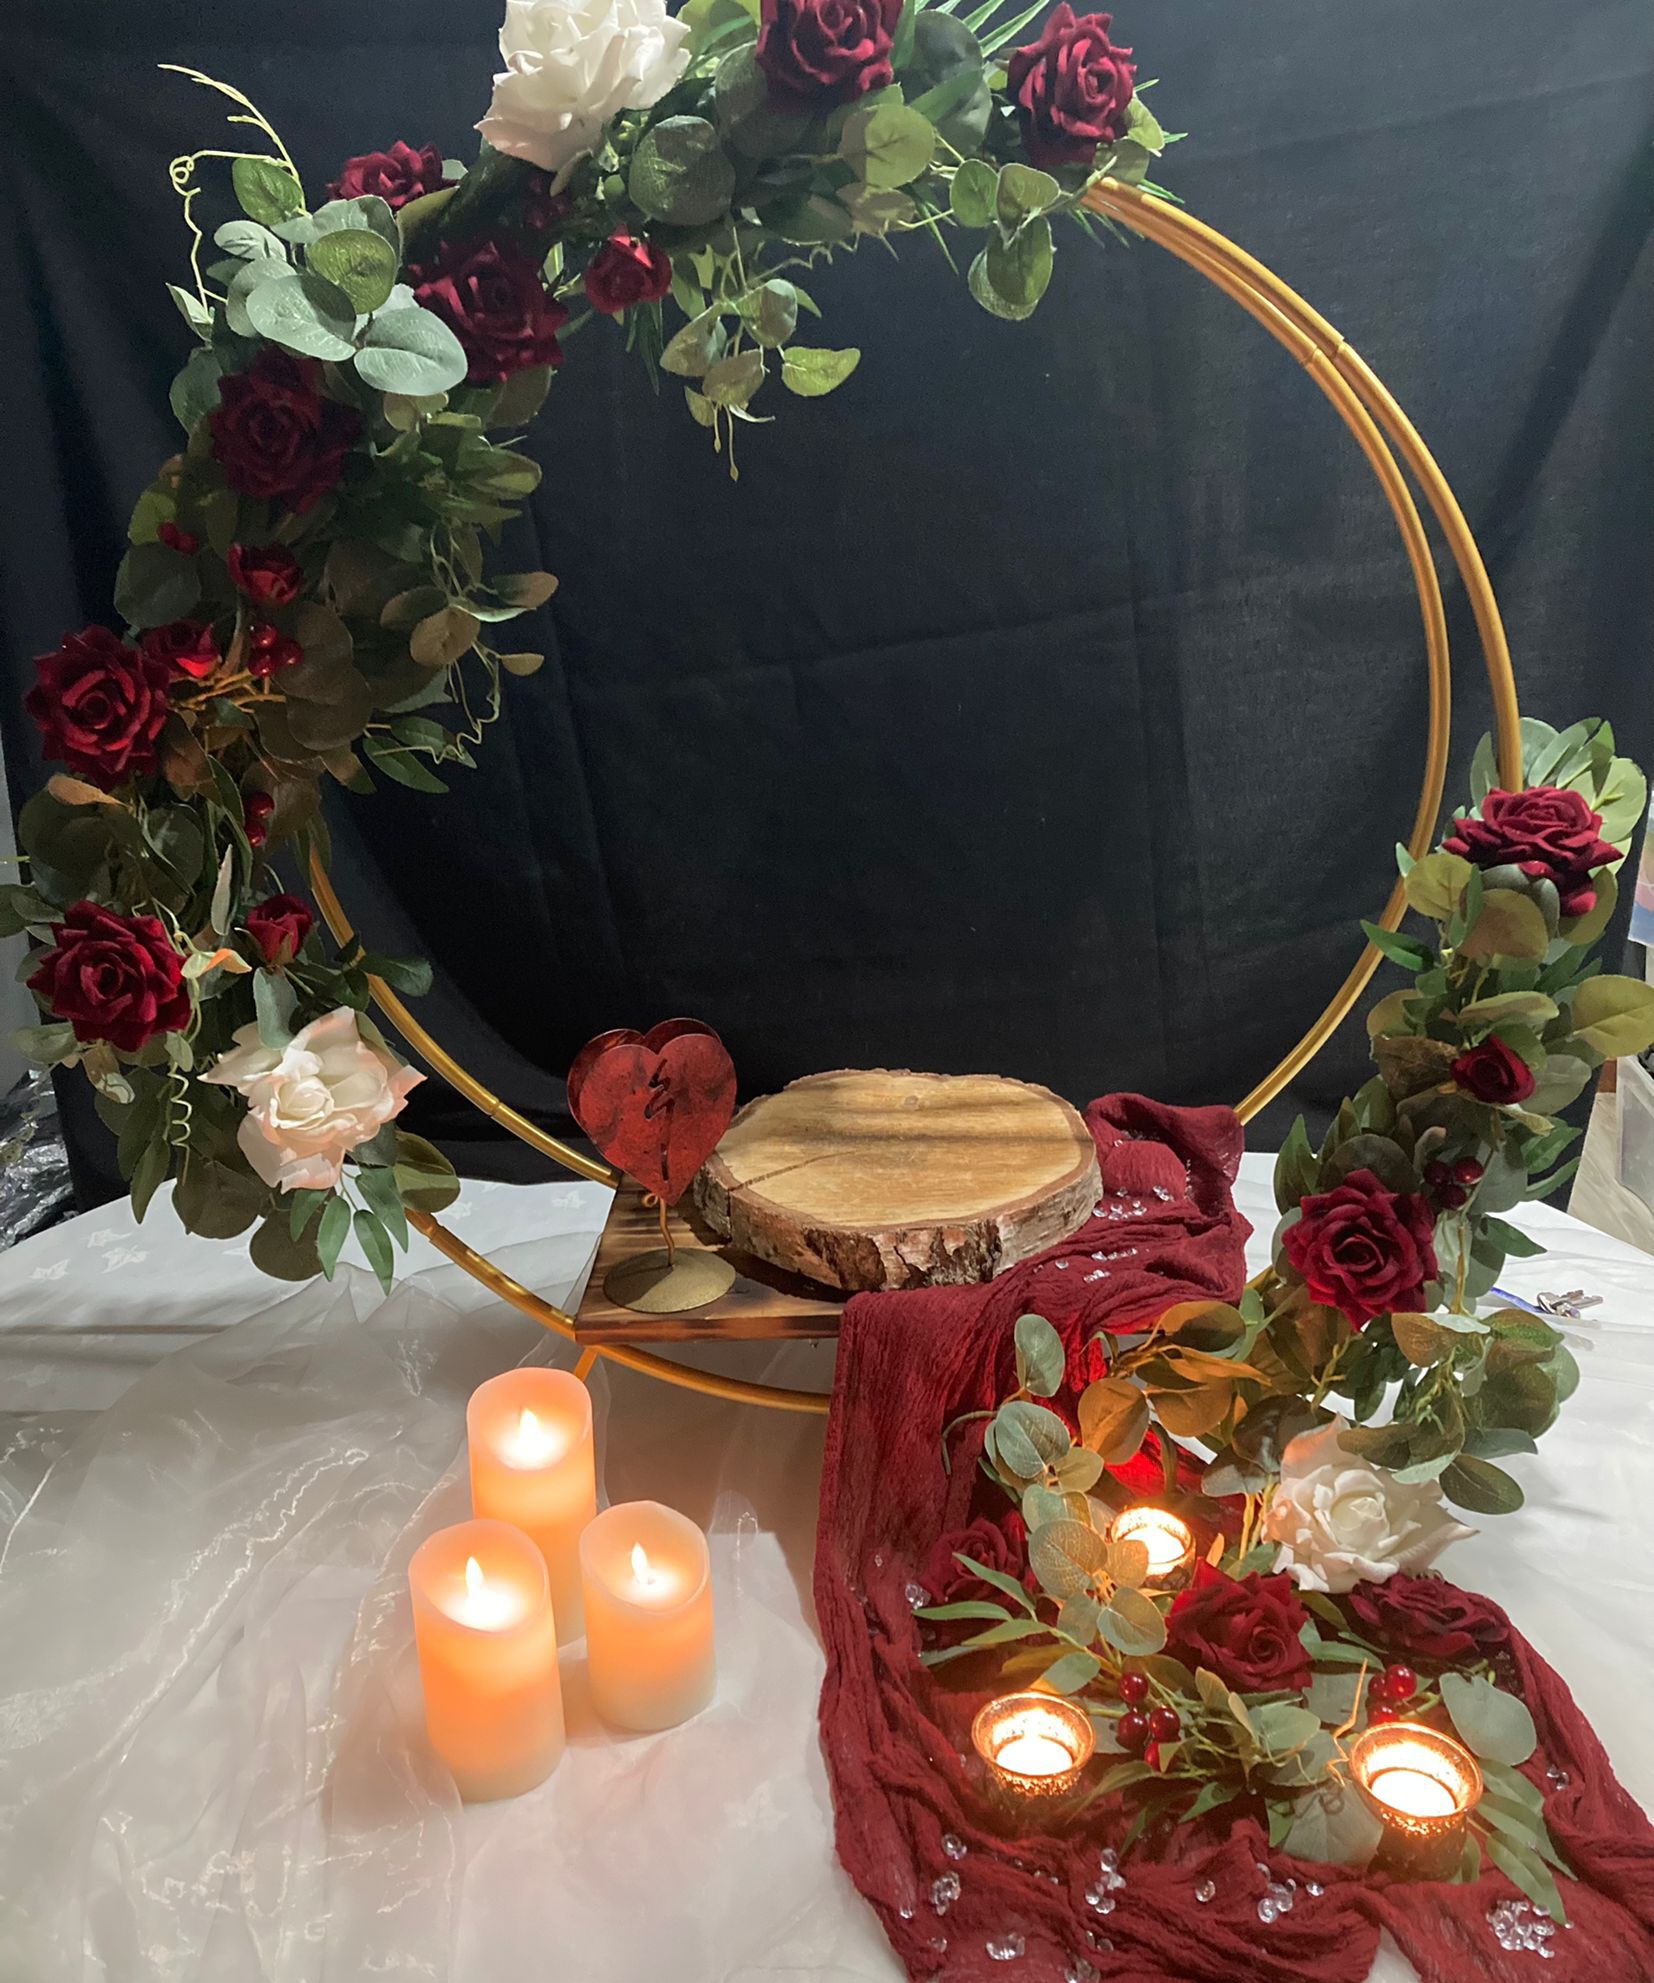 Gold hoop cake stand with red swag and candles